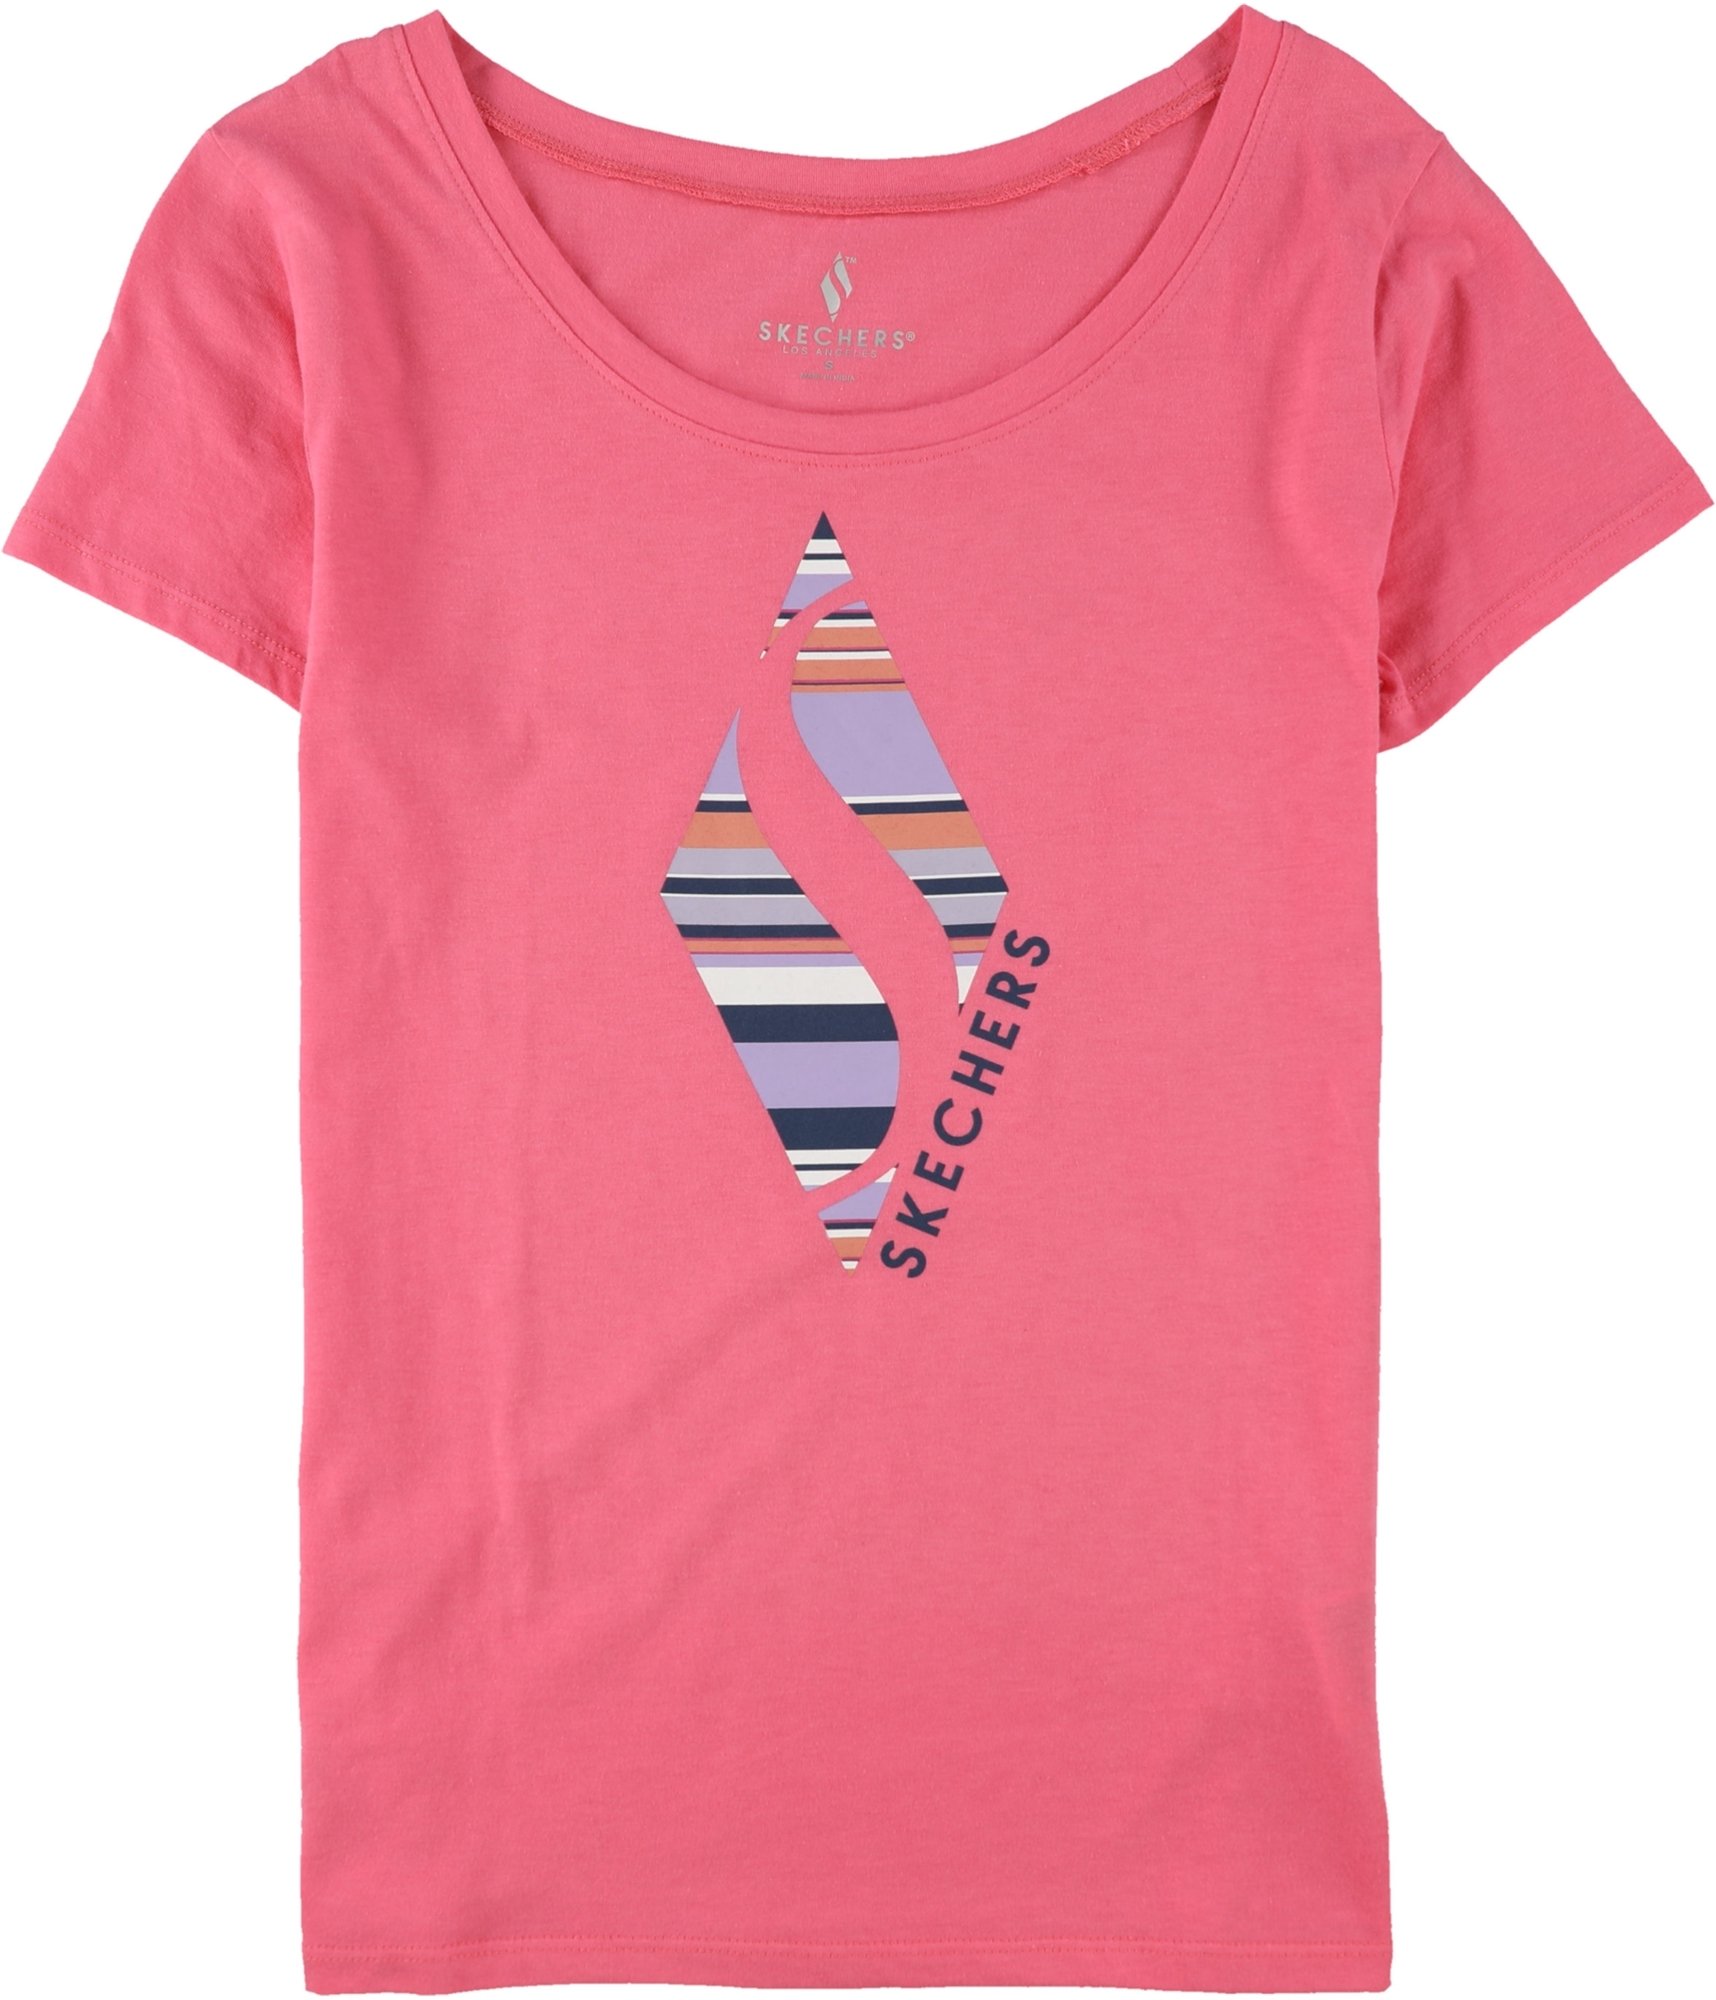 Buy a Skechers Womens Striped Diamond Graphic T-Shirt | Tagsweekly